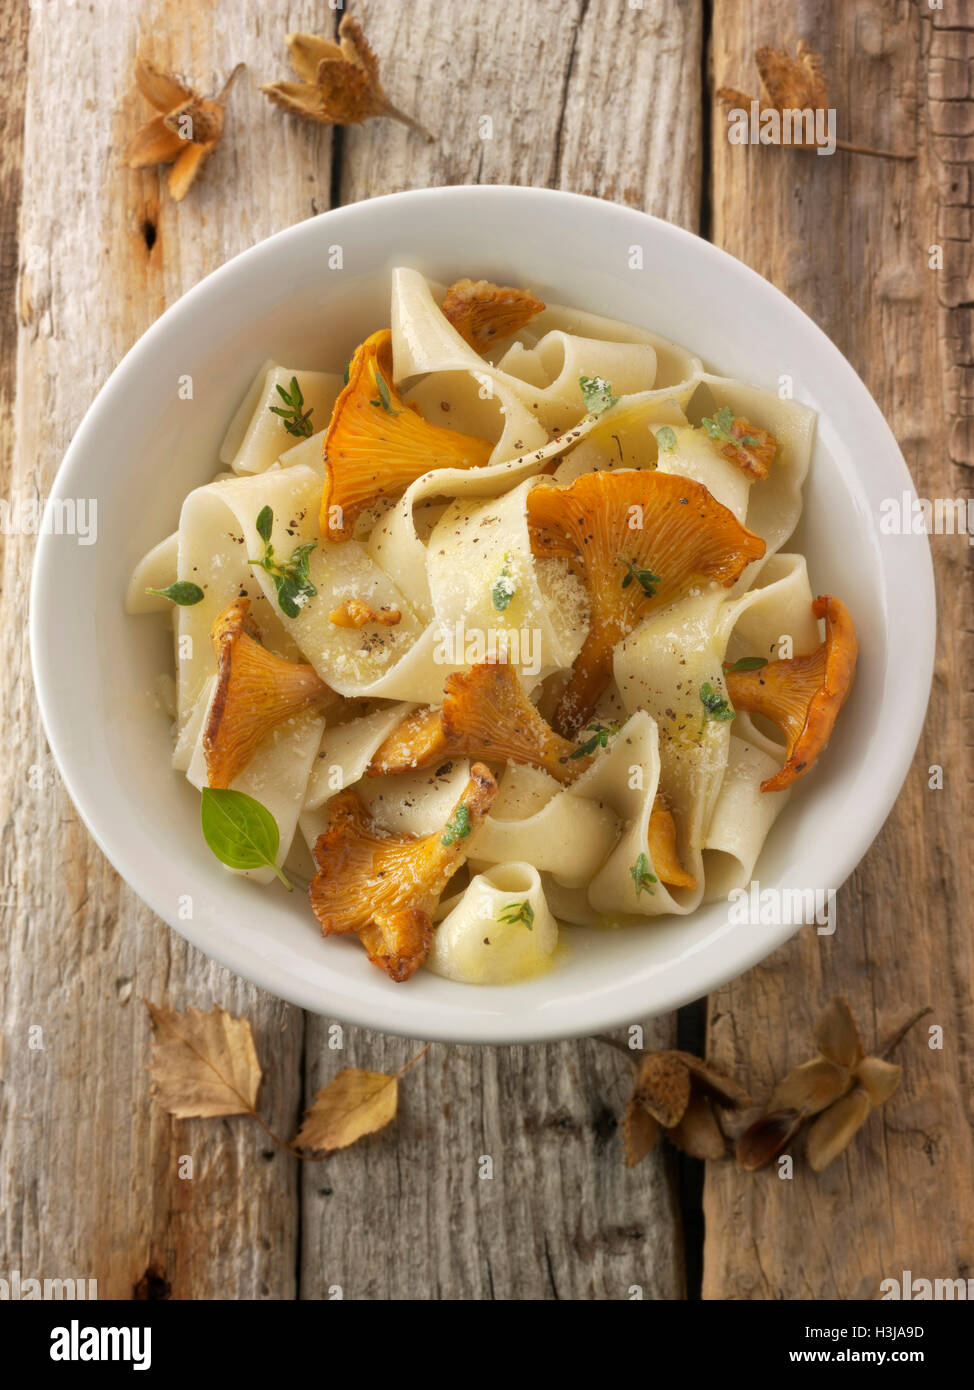 Wiild organic chanterelle or girolle Mushrooms (Cantharellus cibarius) or sauteed in butter with papedelle pasta Stock Photo